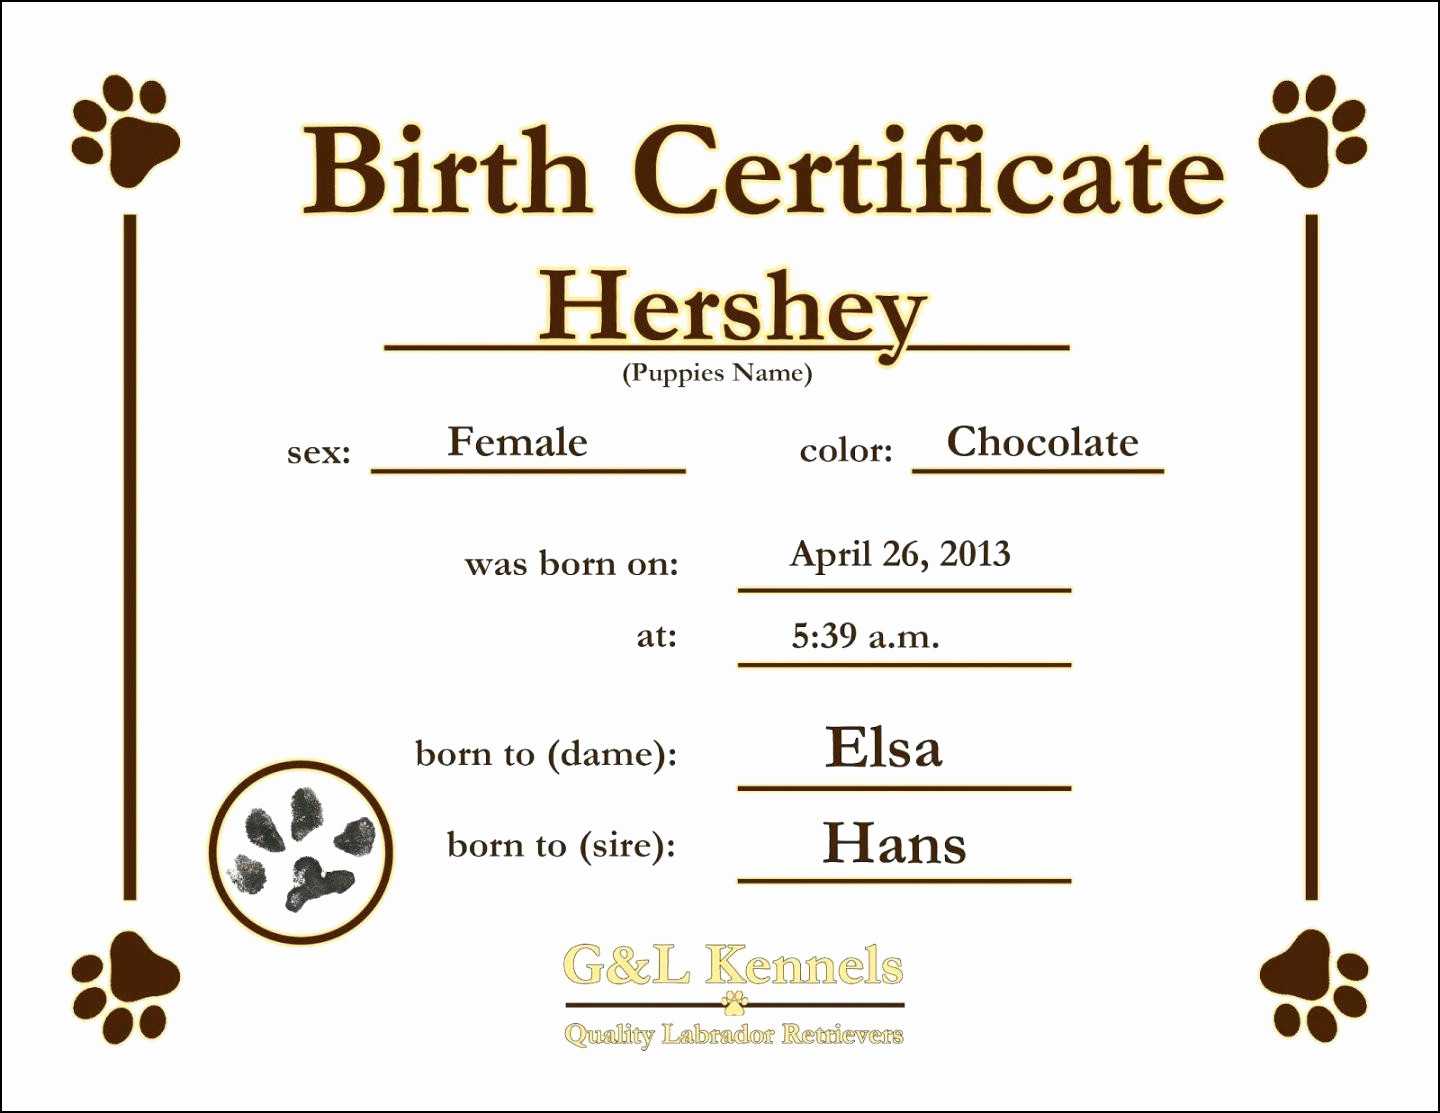 12 Birth Certificate Template | Radaircars With Regard To Birth Certificate Fake Template